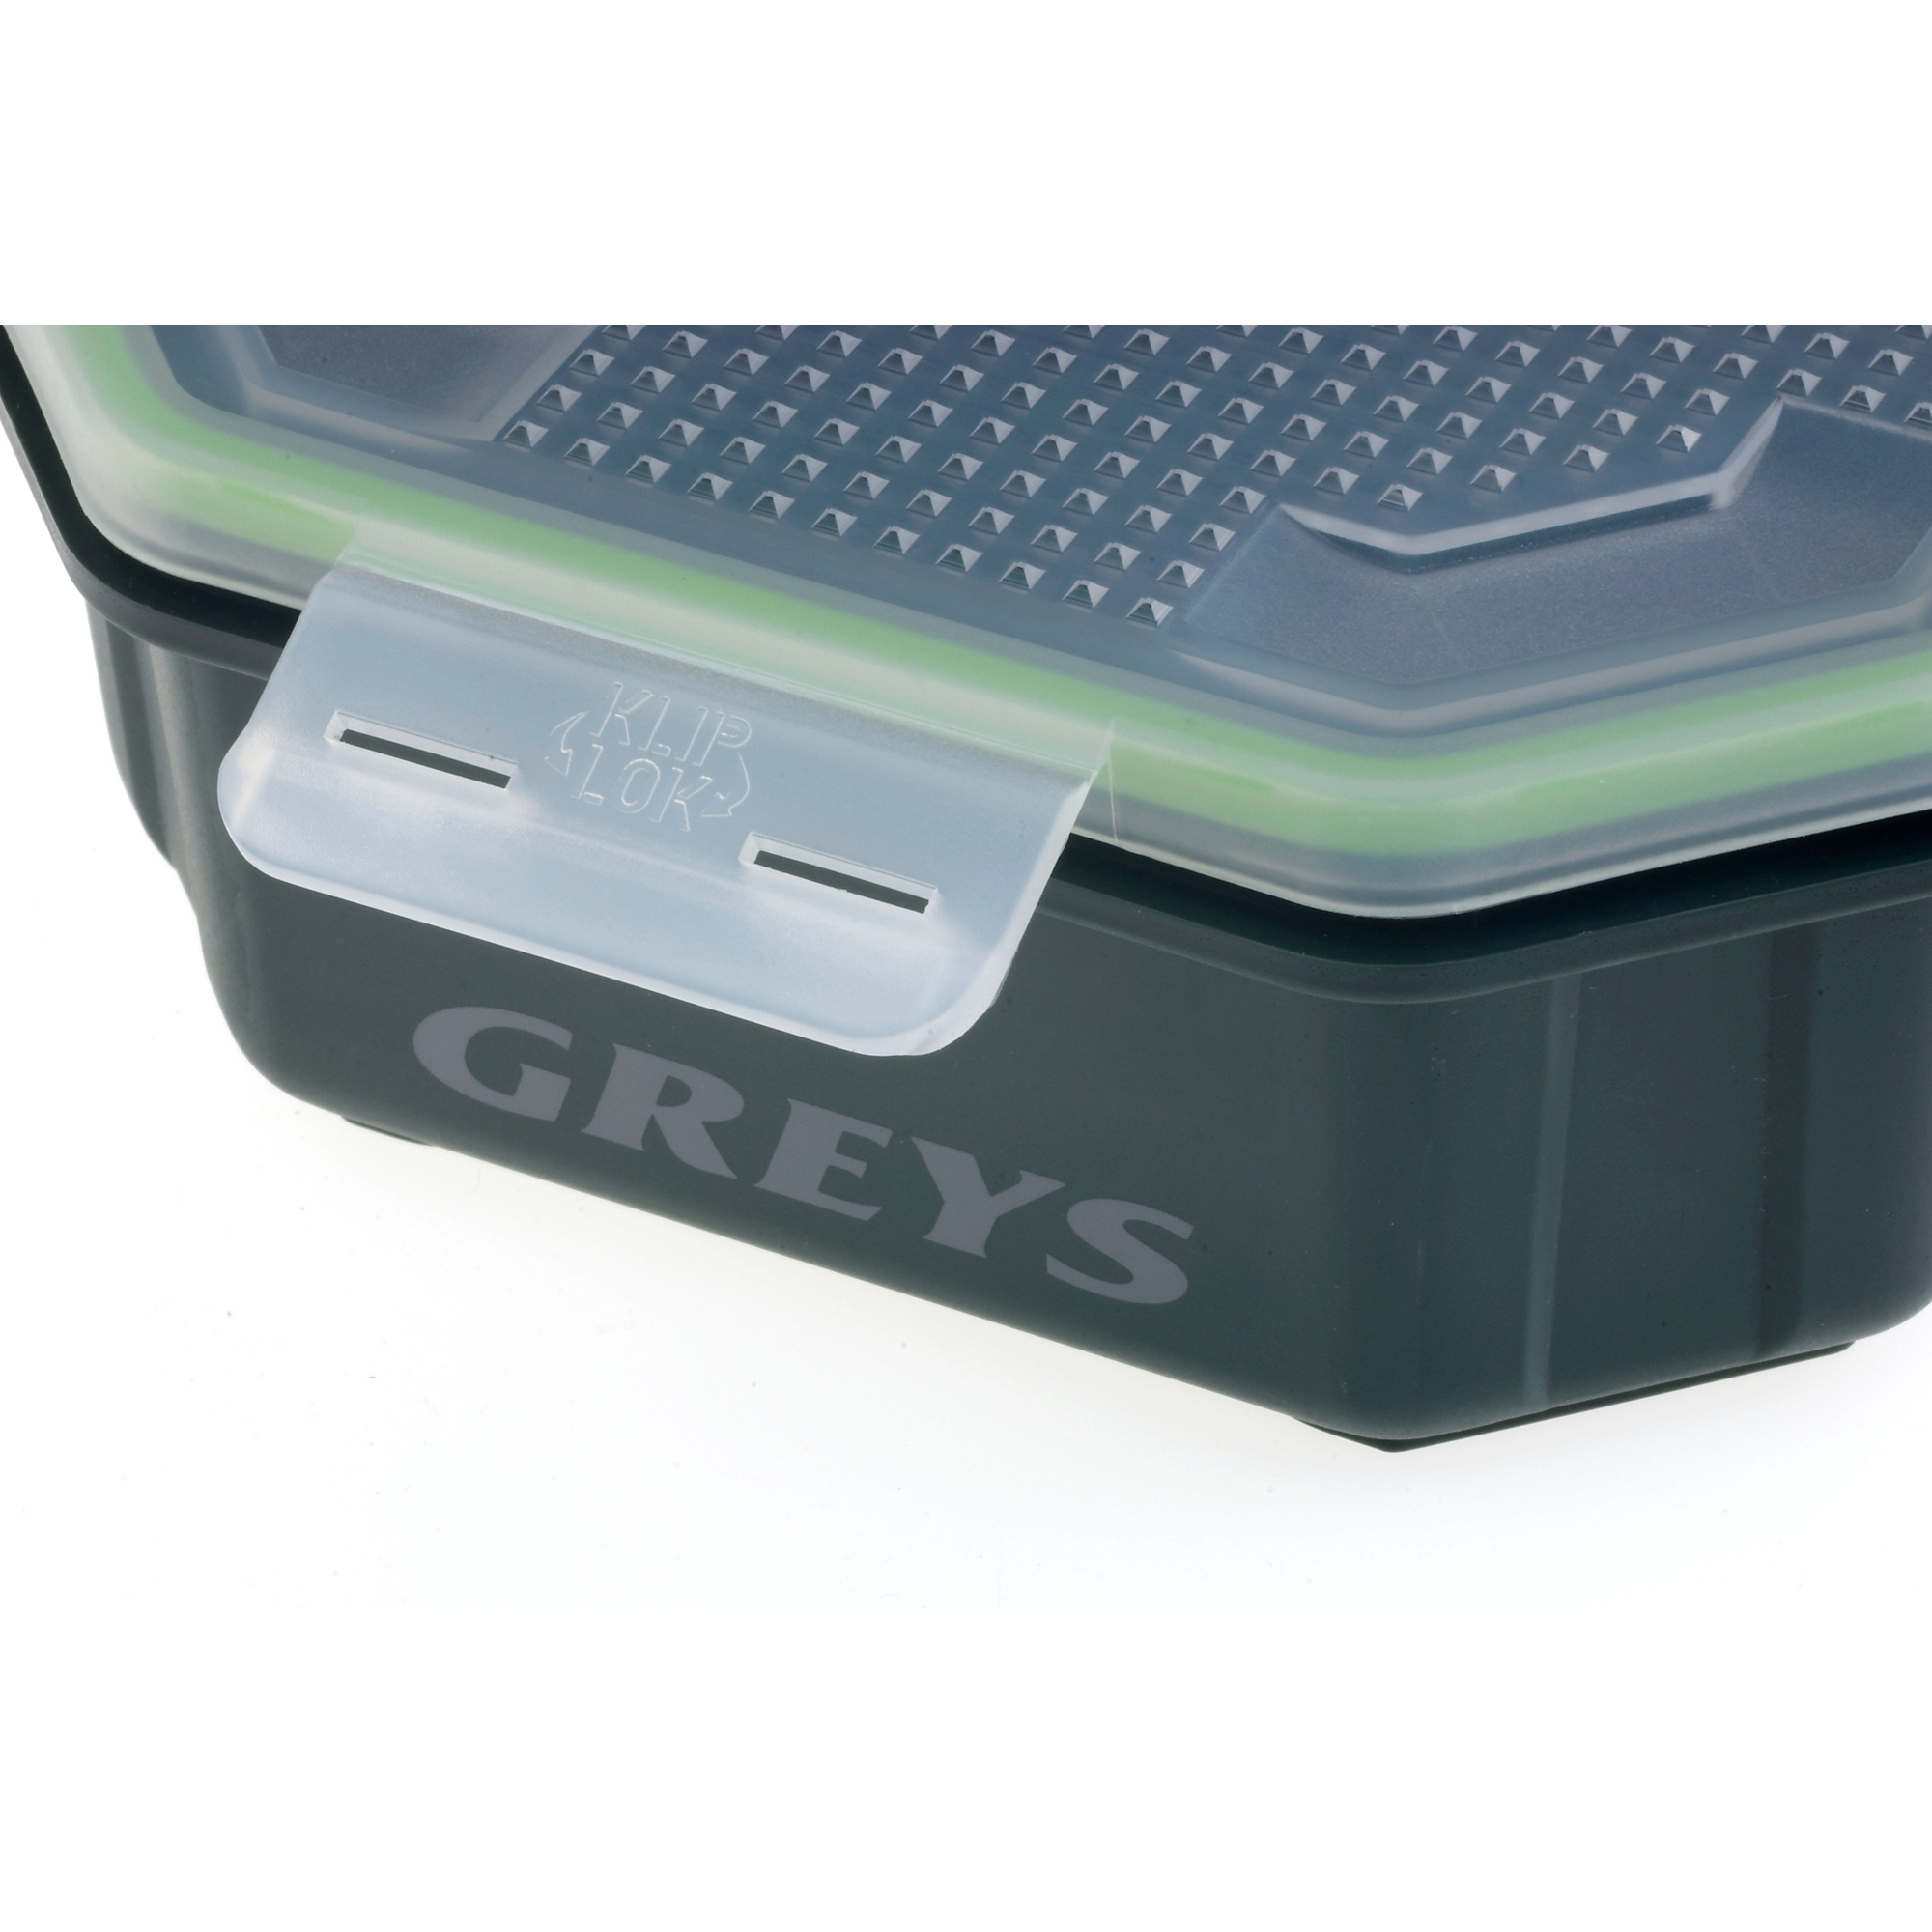 Details about   Greys Klip-lok Flip Top Perforated Lid Bait Box All Sizes